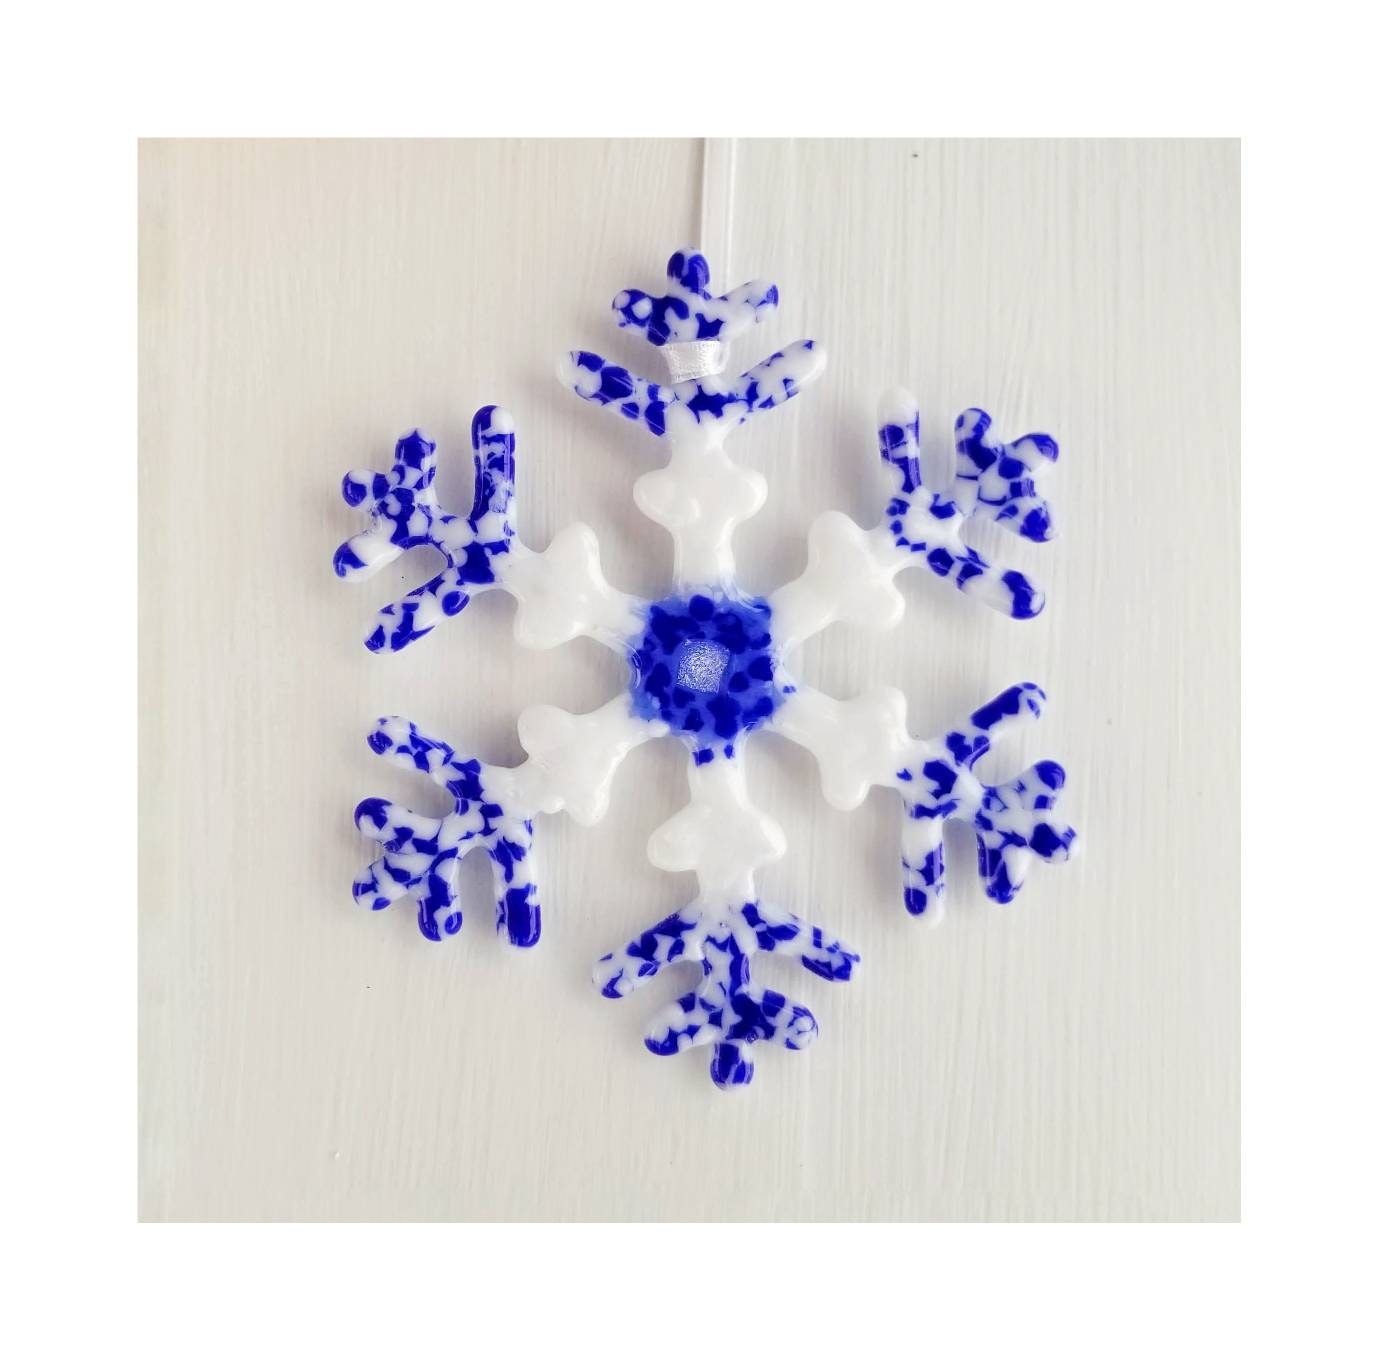 Winter Snowflake Ornament, Kiln Fused Glass, Cobalt Blue & White. Thoughtful gifts for Christmas or Hanauka. Includes Clear padded gift box.